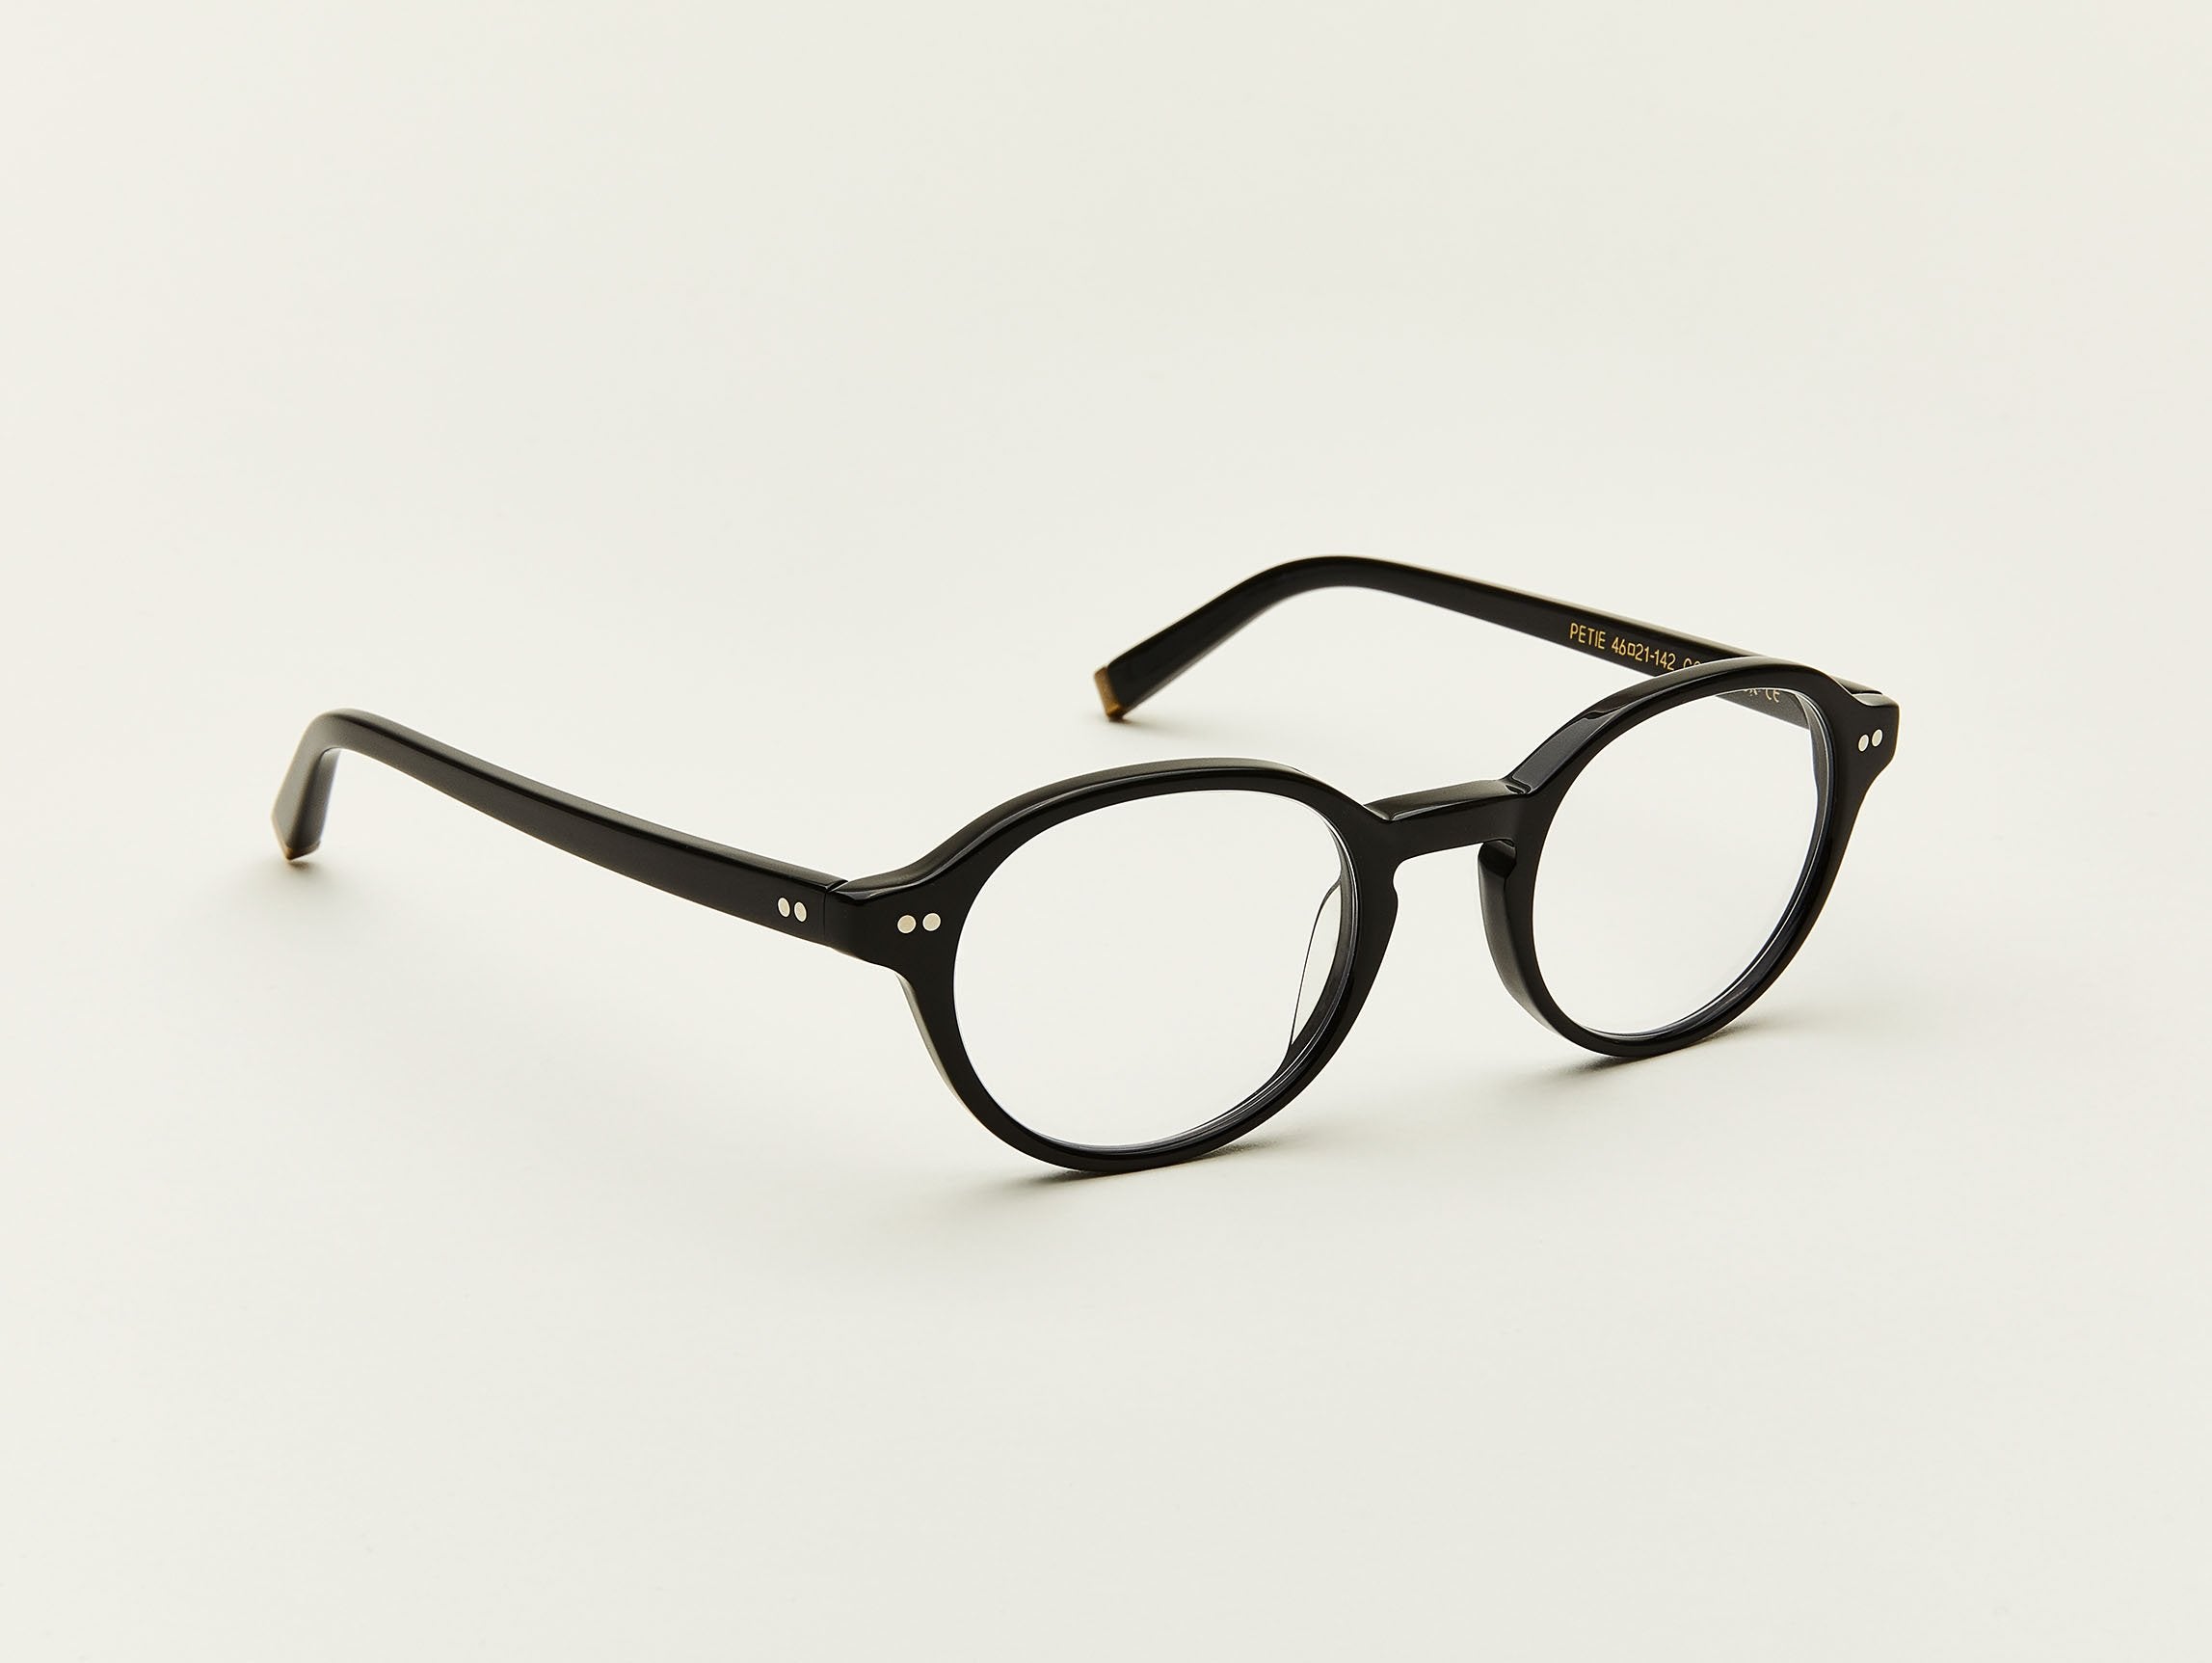 PETIE | Round Eyeglasses – MOSCOT NYC SINCE 1915